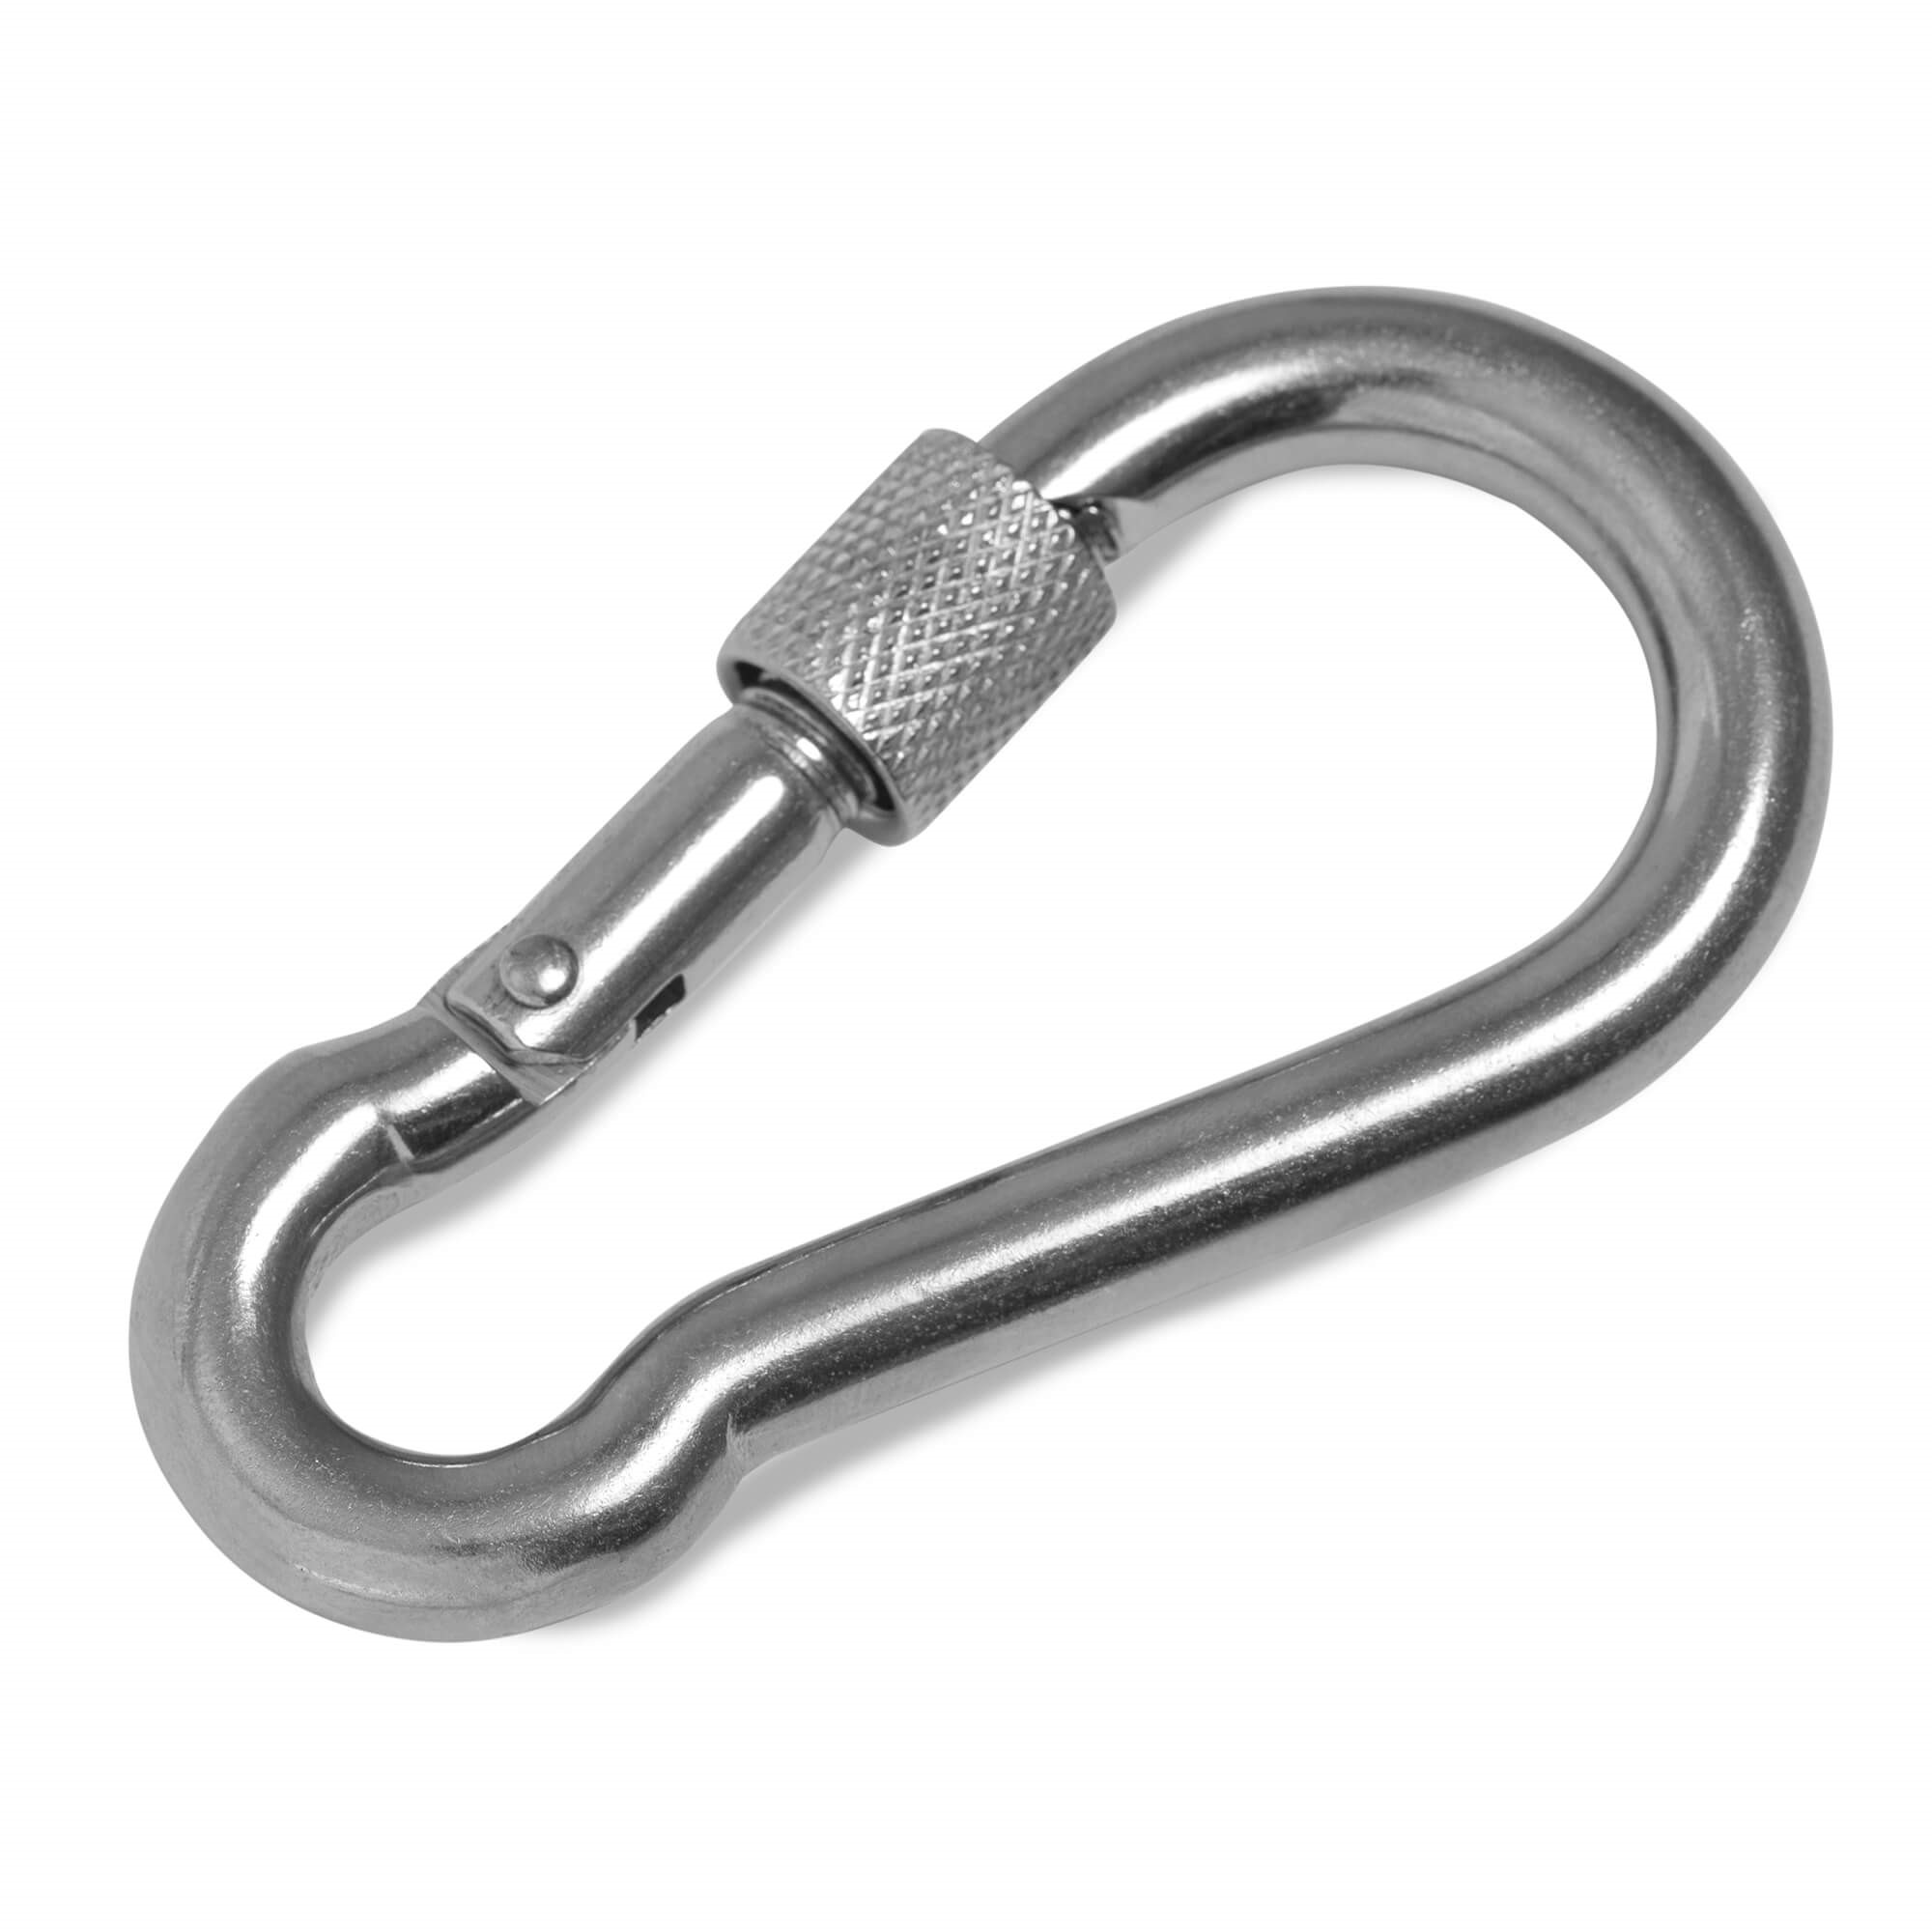 Firefighter snap hook 50mm x 5mm with screw stainless steel AISI 316 (V4A) (10 pieces) Snap hook firefighter snap hook firefighter snap hook quick release